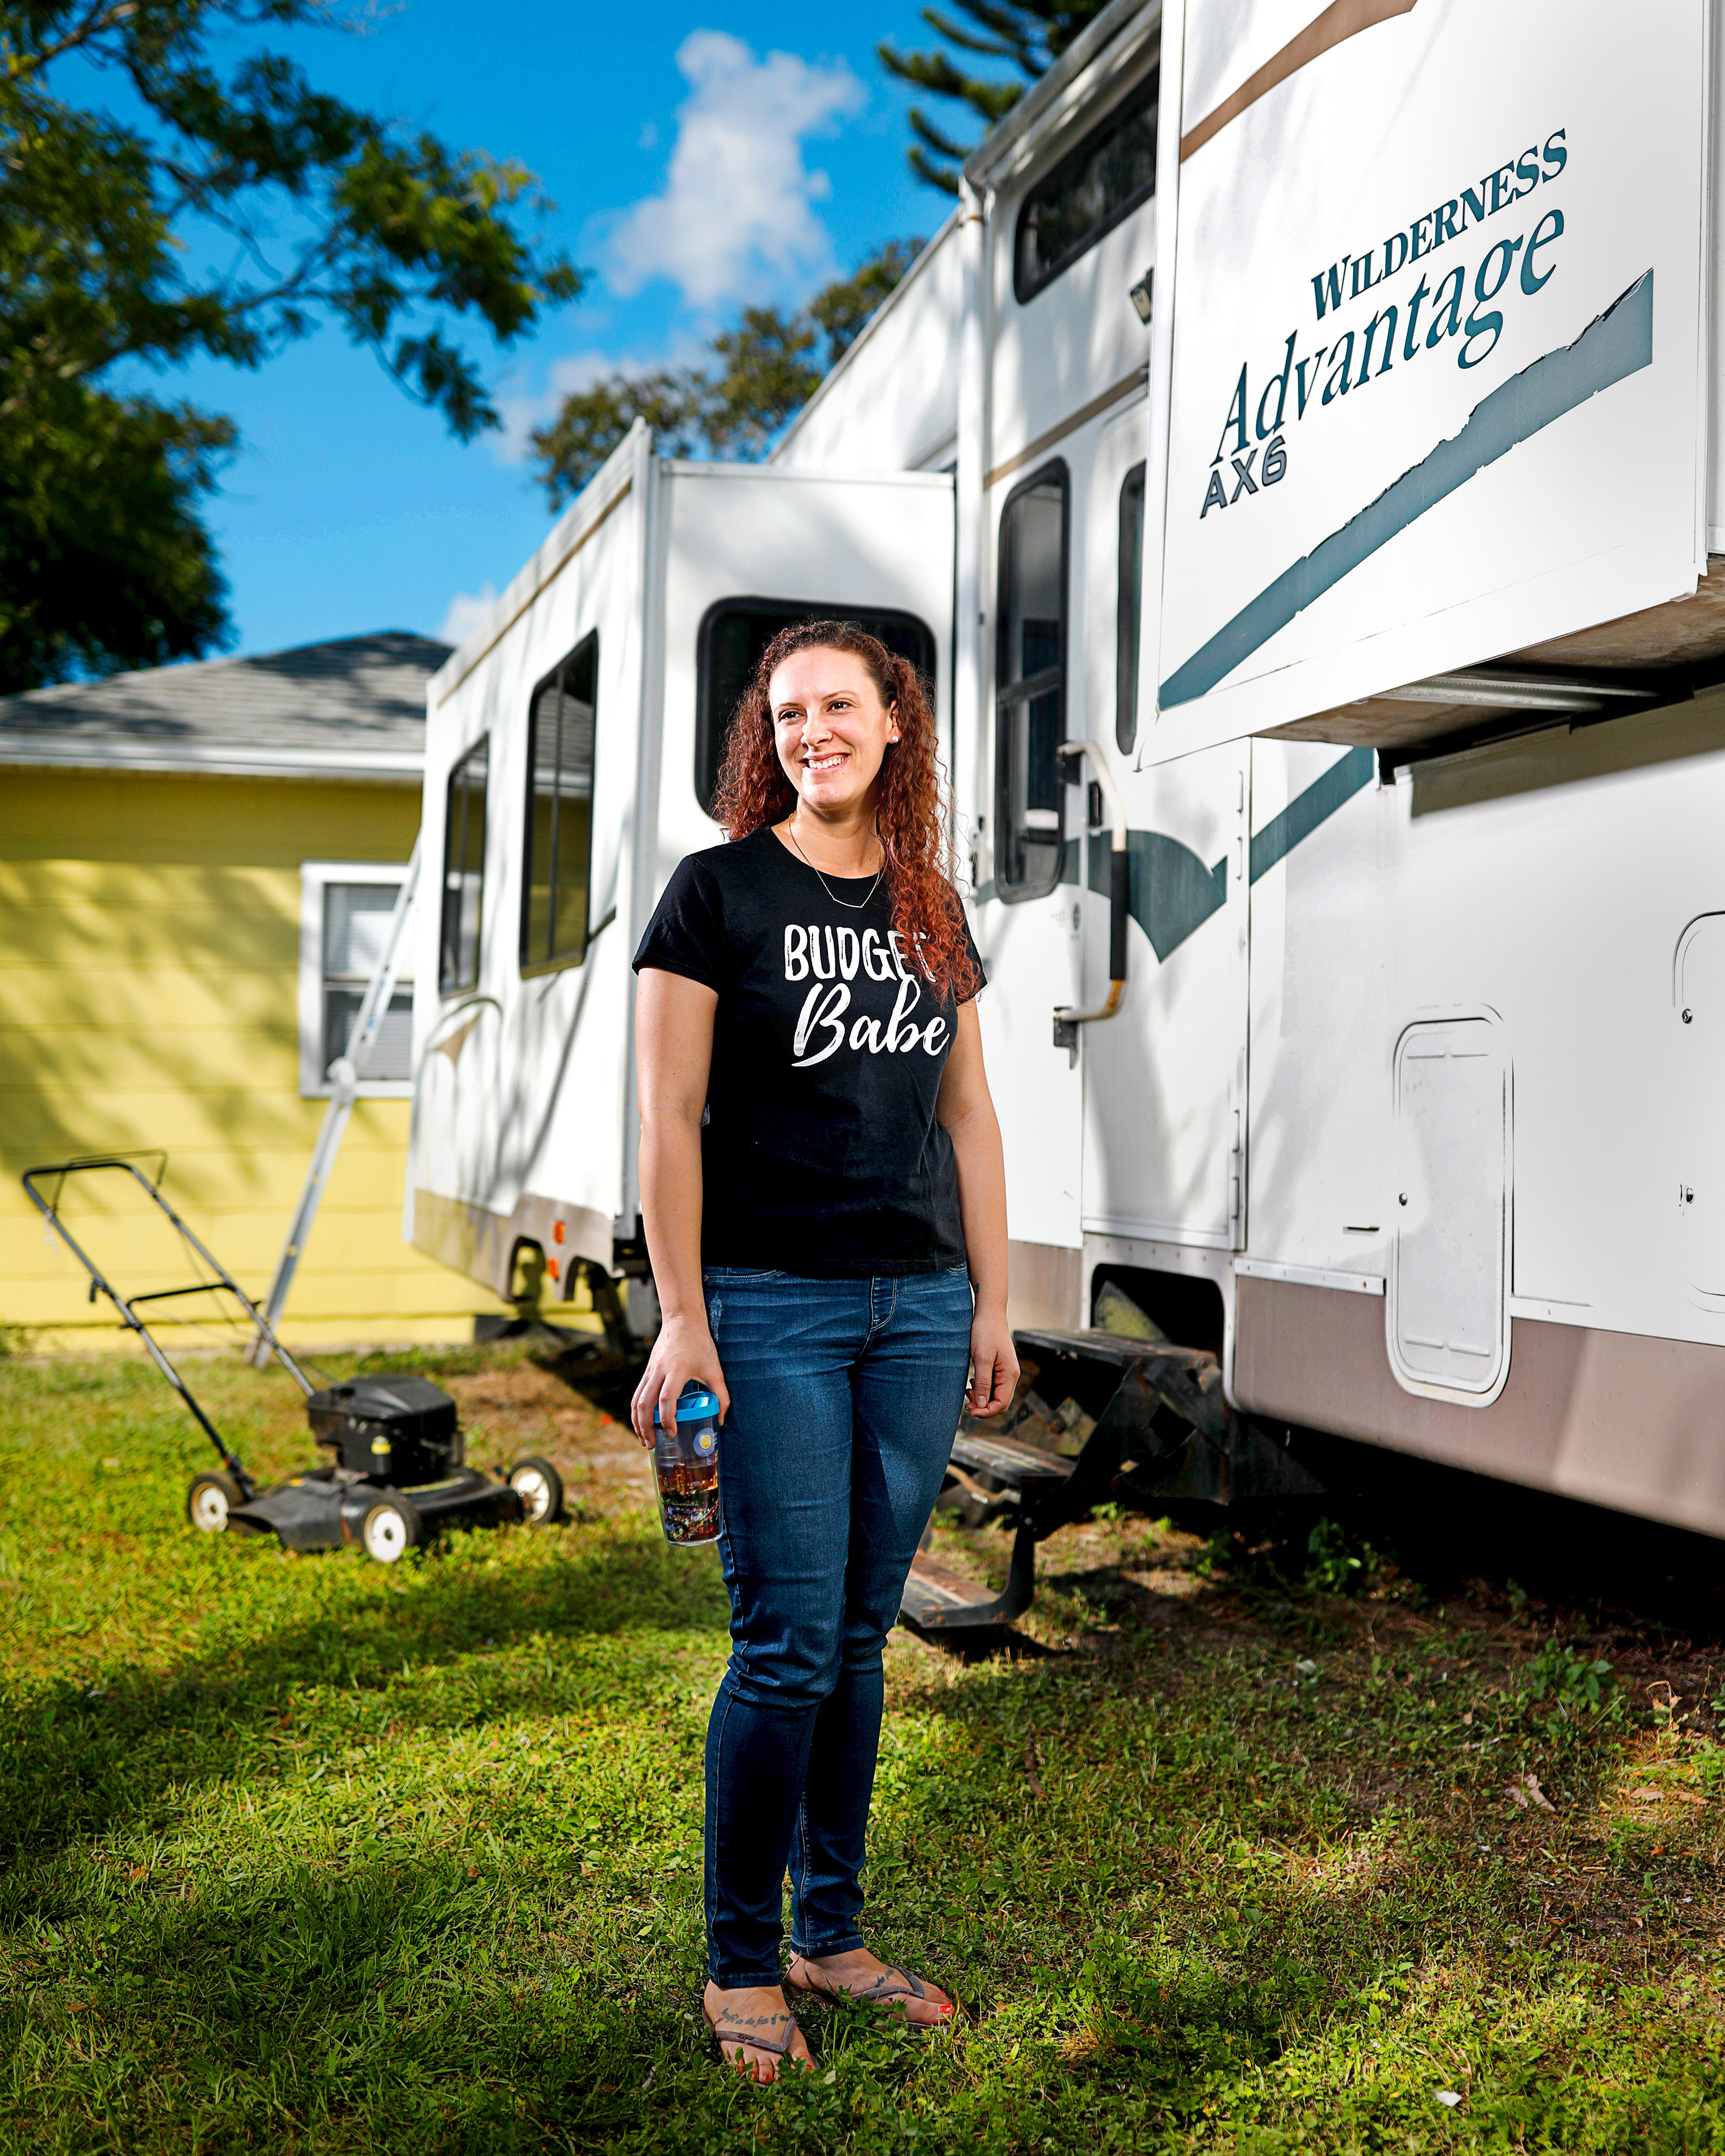 Jen Smith at her home in St. Petersburg. She used her T-shirt money to buy an RV she hopes to flip.